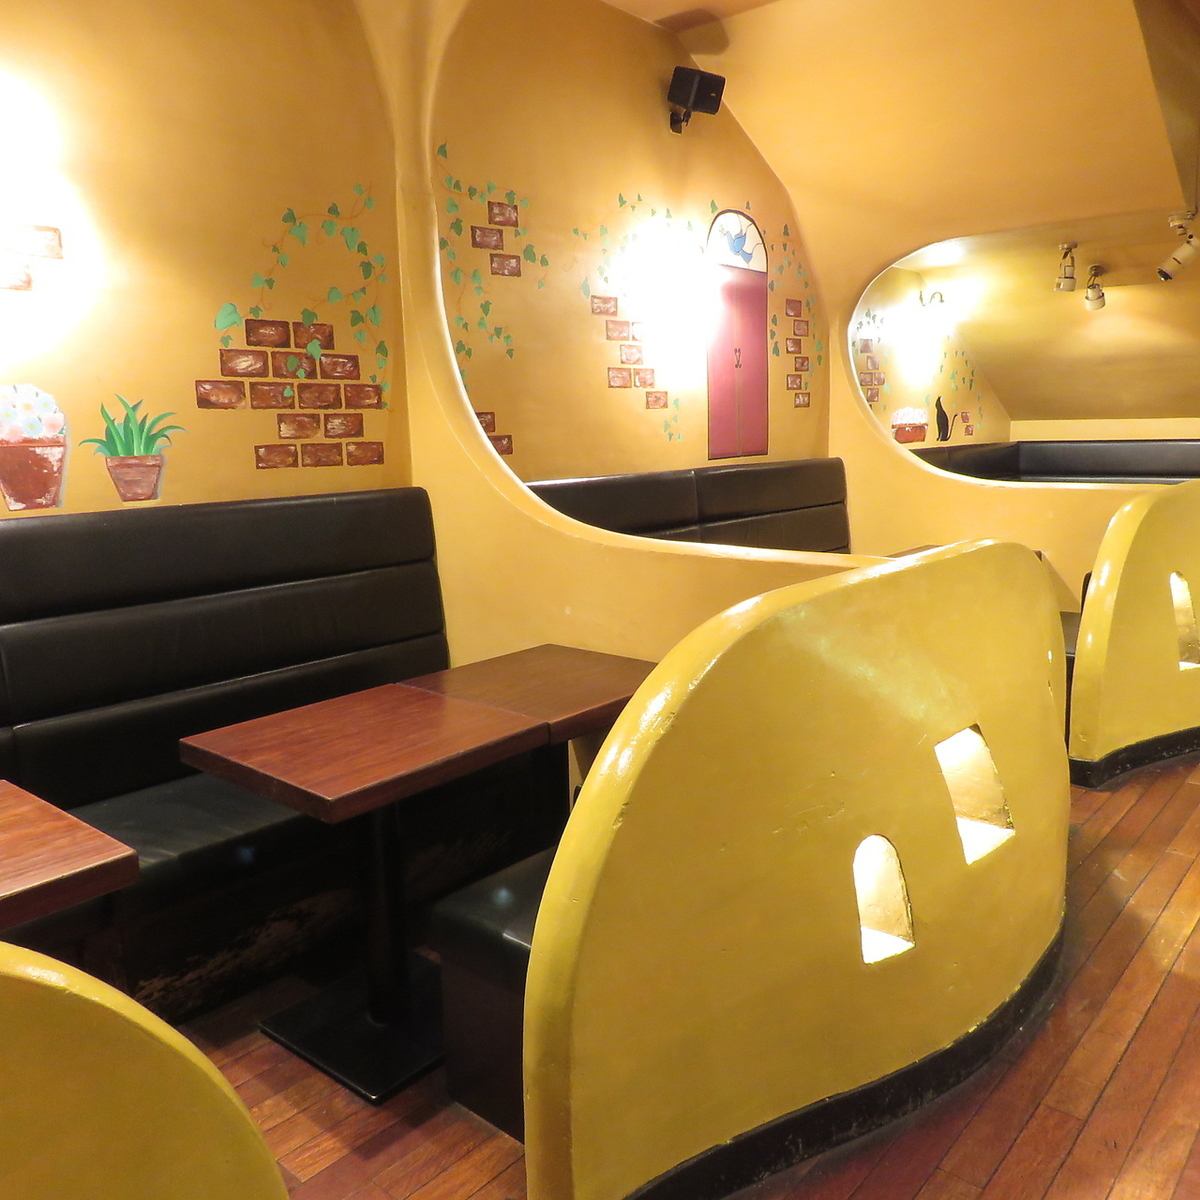 Relax in a kamakura private room♪ A 2.5-hour girls' night out with all-you-can-drink "8 dishes to choose from" for 3,850 yen!